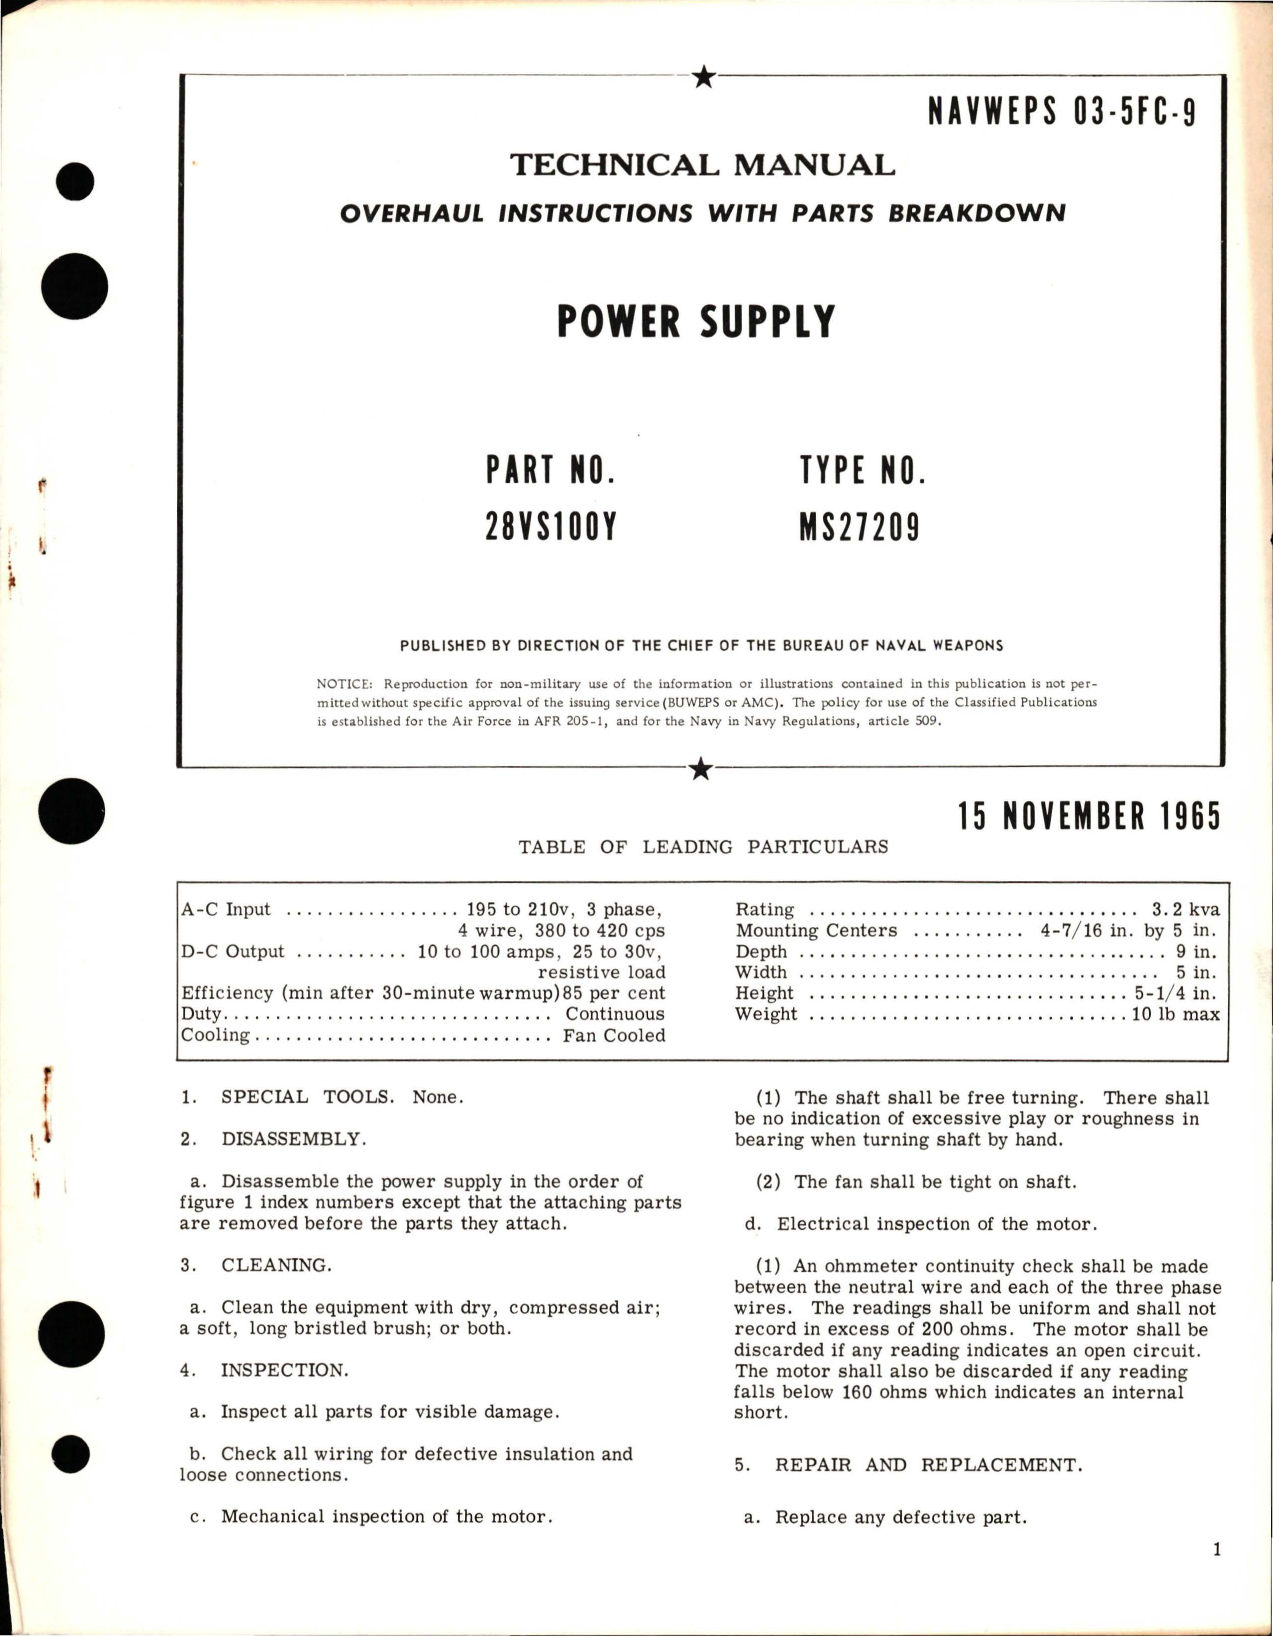 Sample page 1 from AirCorps Library document: Overhaul Instructions with Parts Breakdown for Power Supply - Part 28VS100Y - Type MS27209